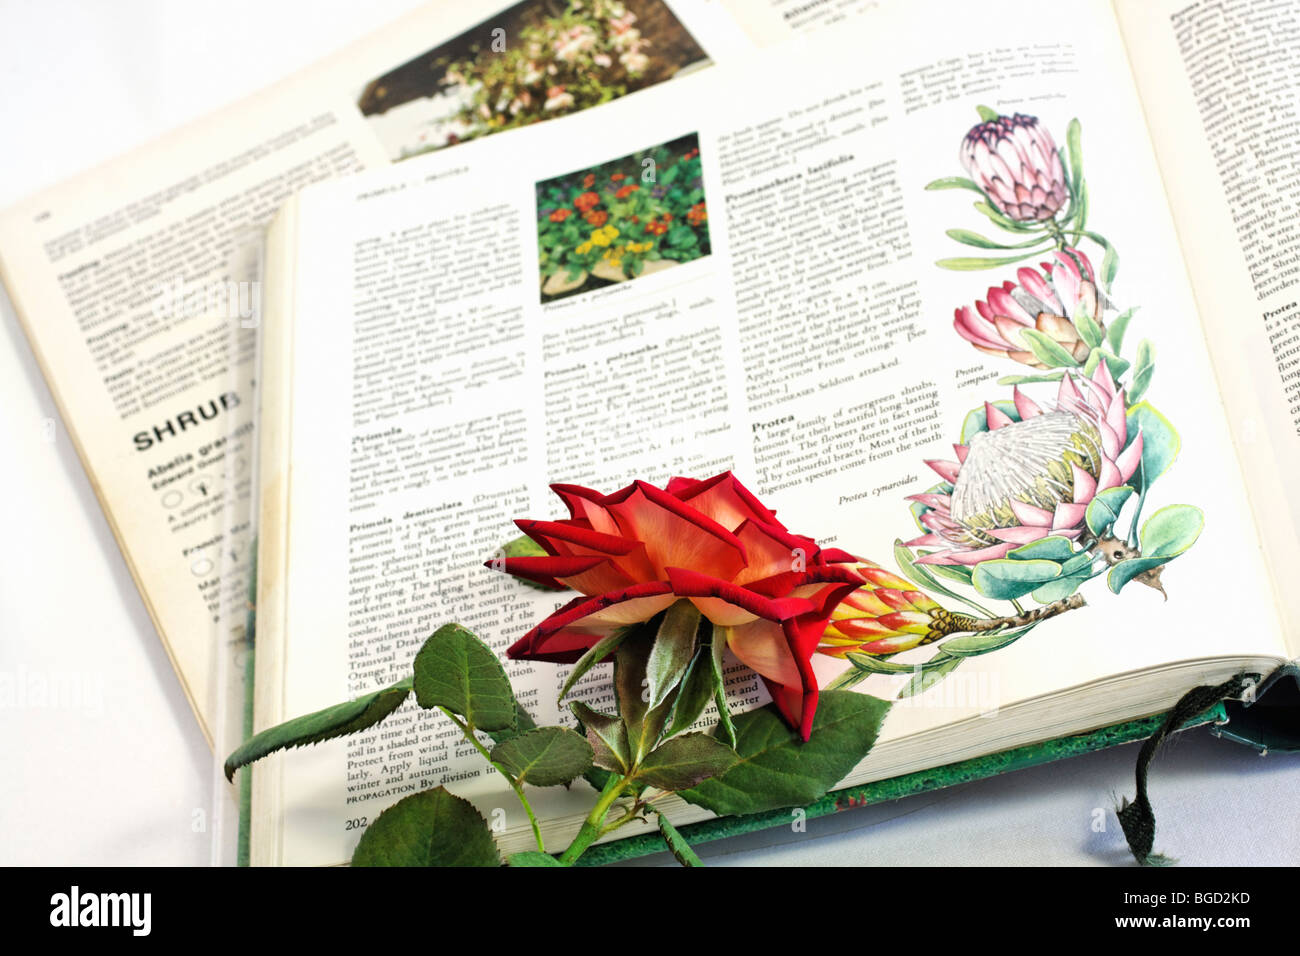 Gardening book and encyclopedia with red rose. Color. Stock Photo